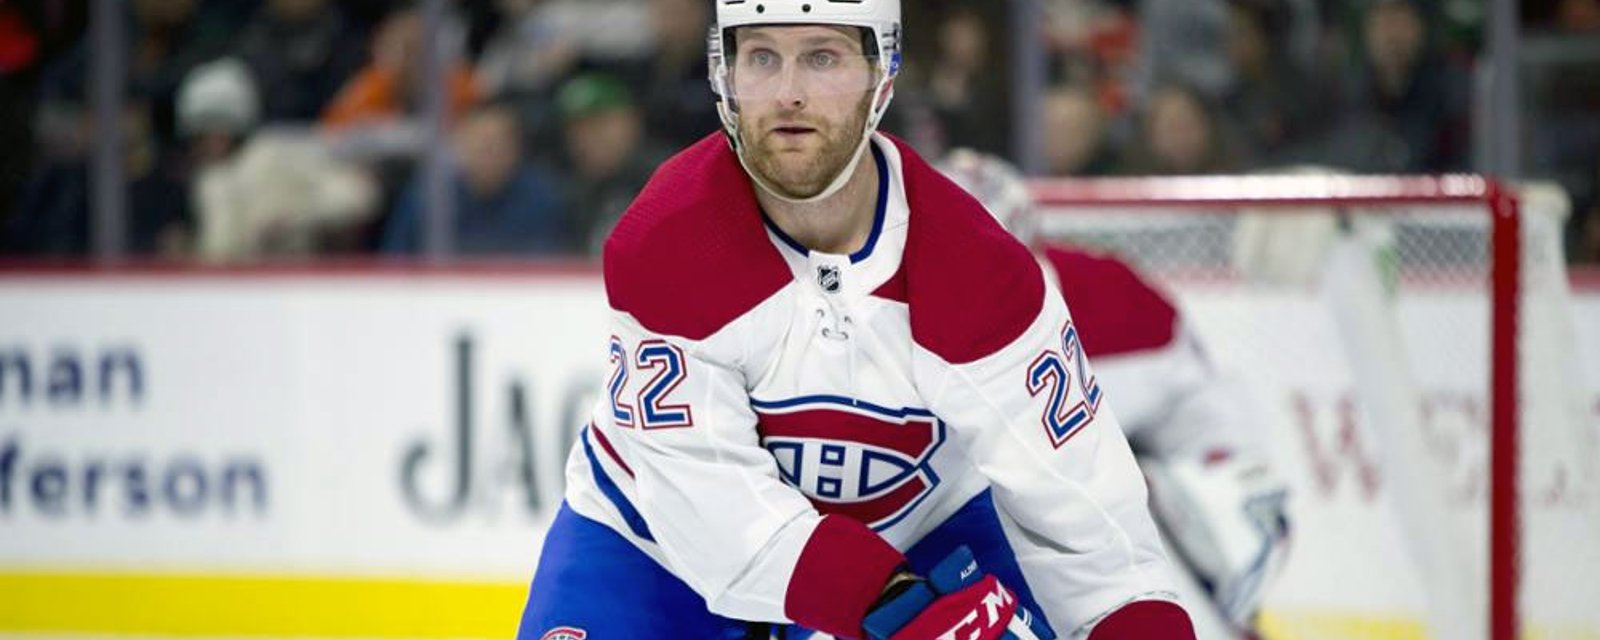 Nearly two dozen NHL veterans placed on waivers including Alzner, Petrovic, Gaunce and Weise